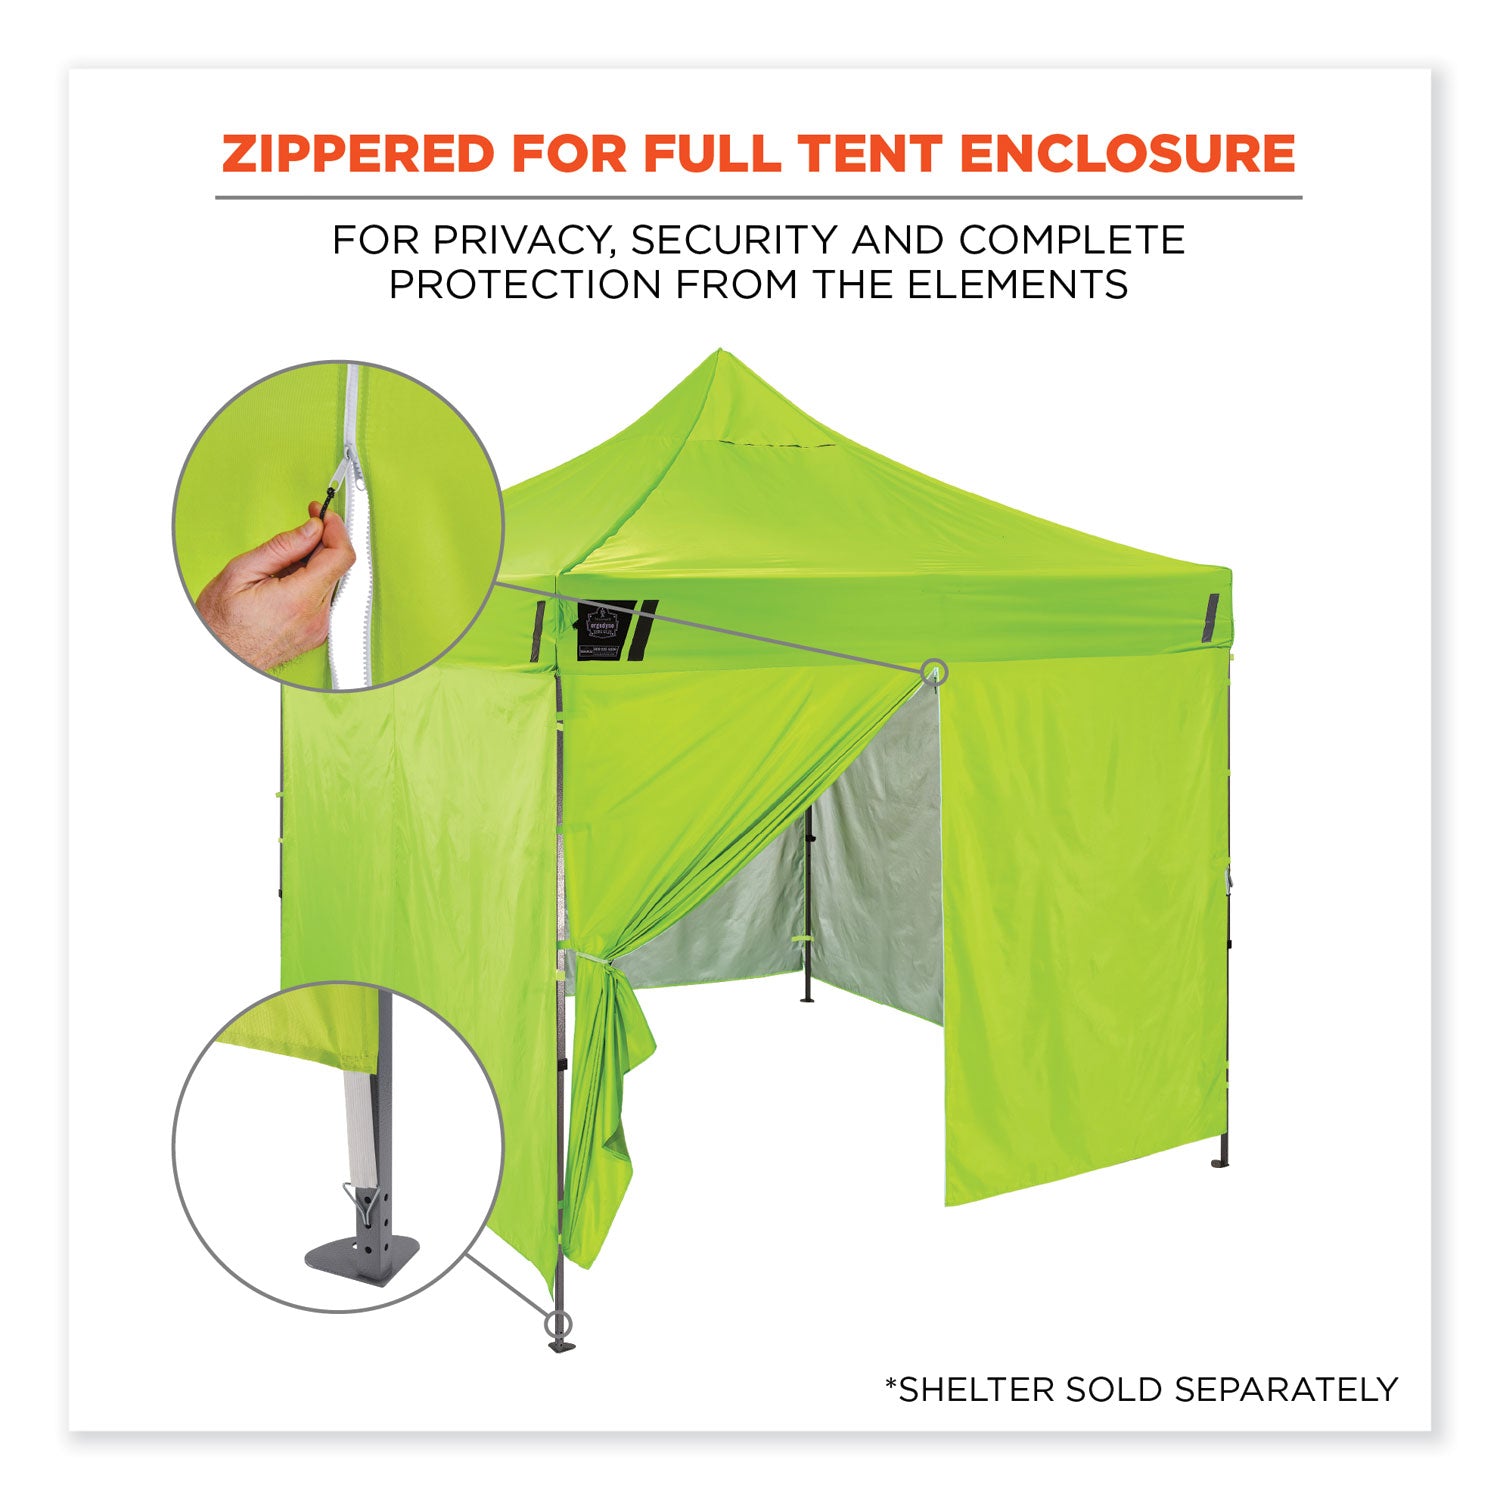 shax-6096-pop-up-tent-sidewall-with-zipper-single-skin-10-ft-x-10-ft-polyester-lime-ships-in-1-3-business-days_ego12978 - 2